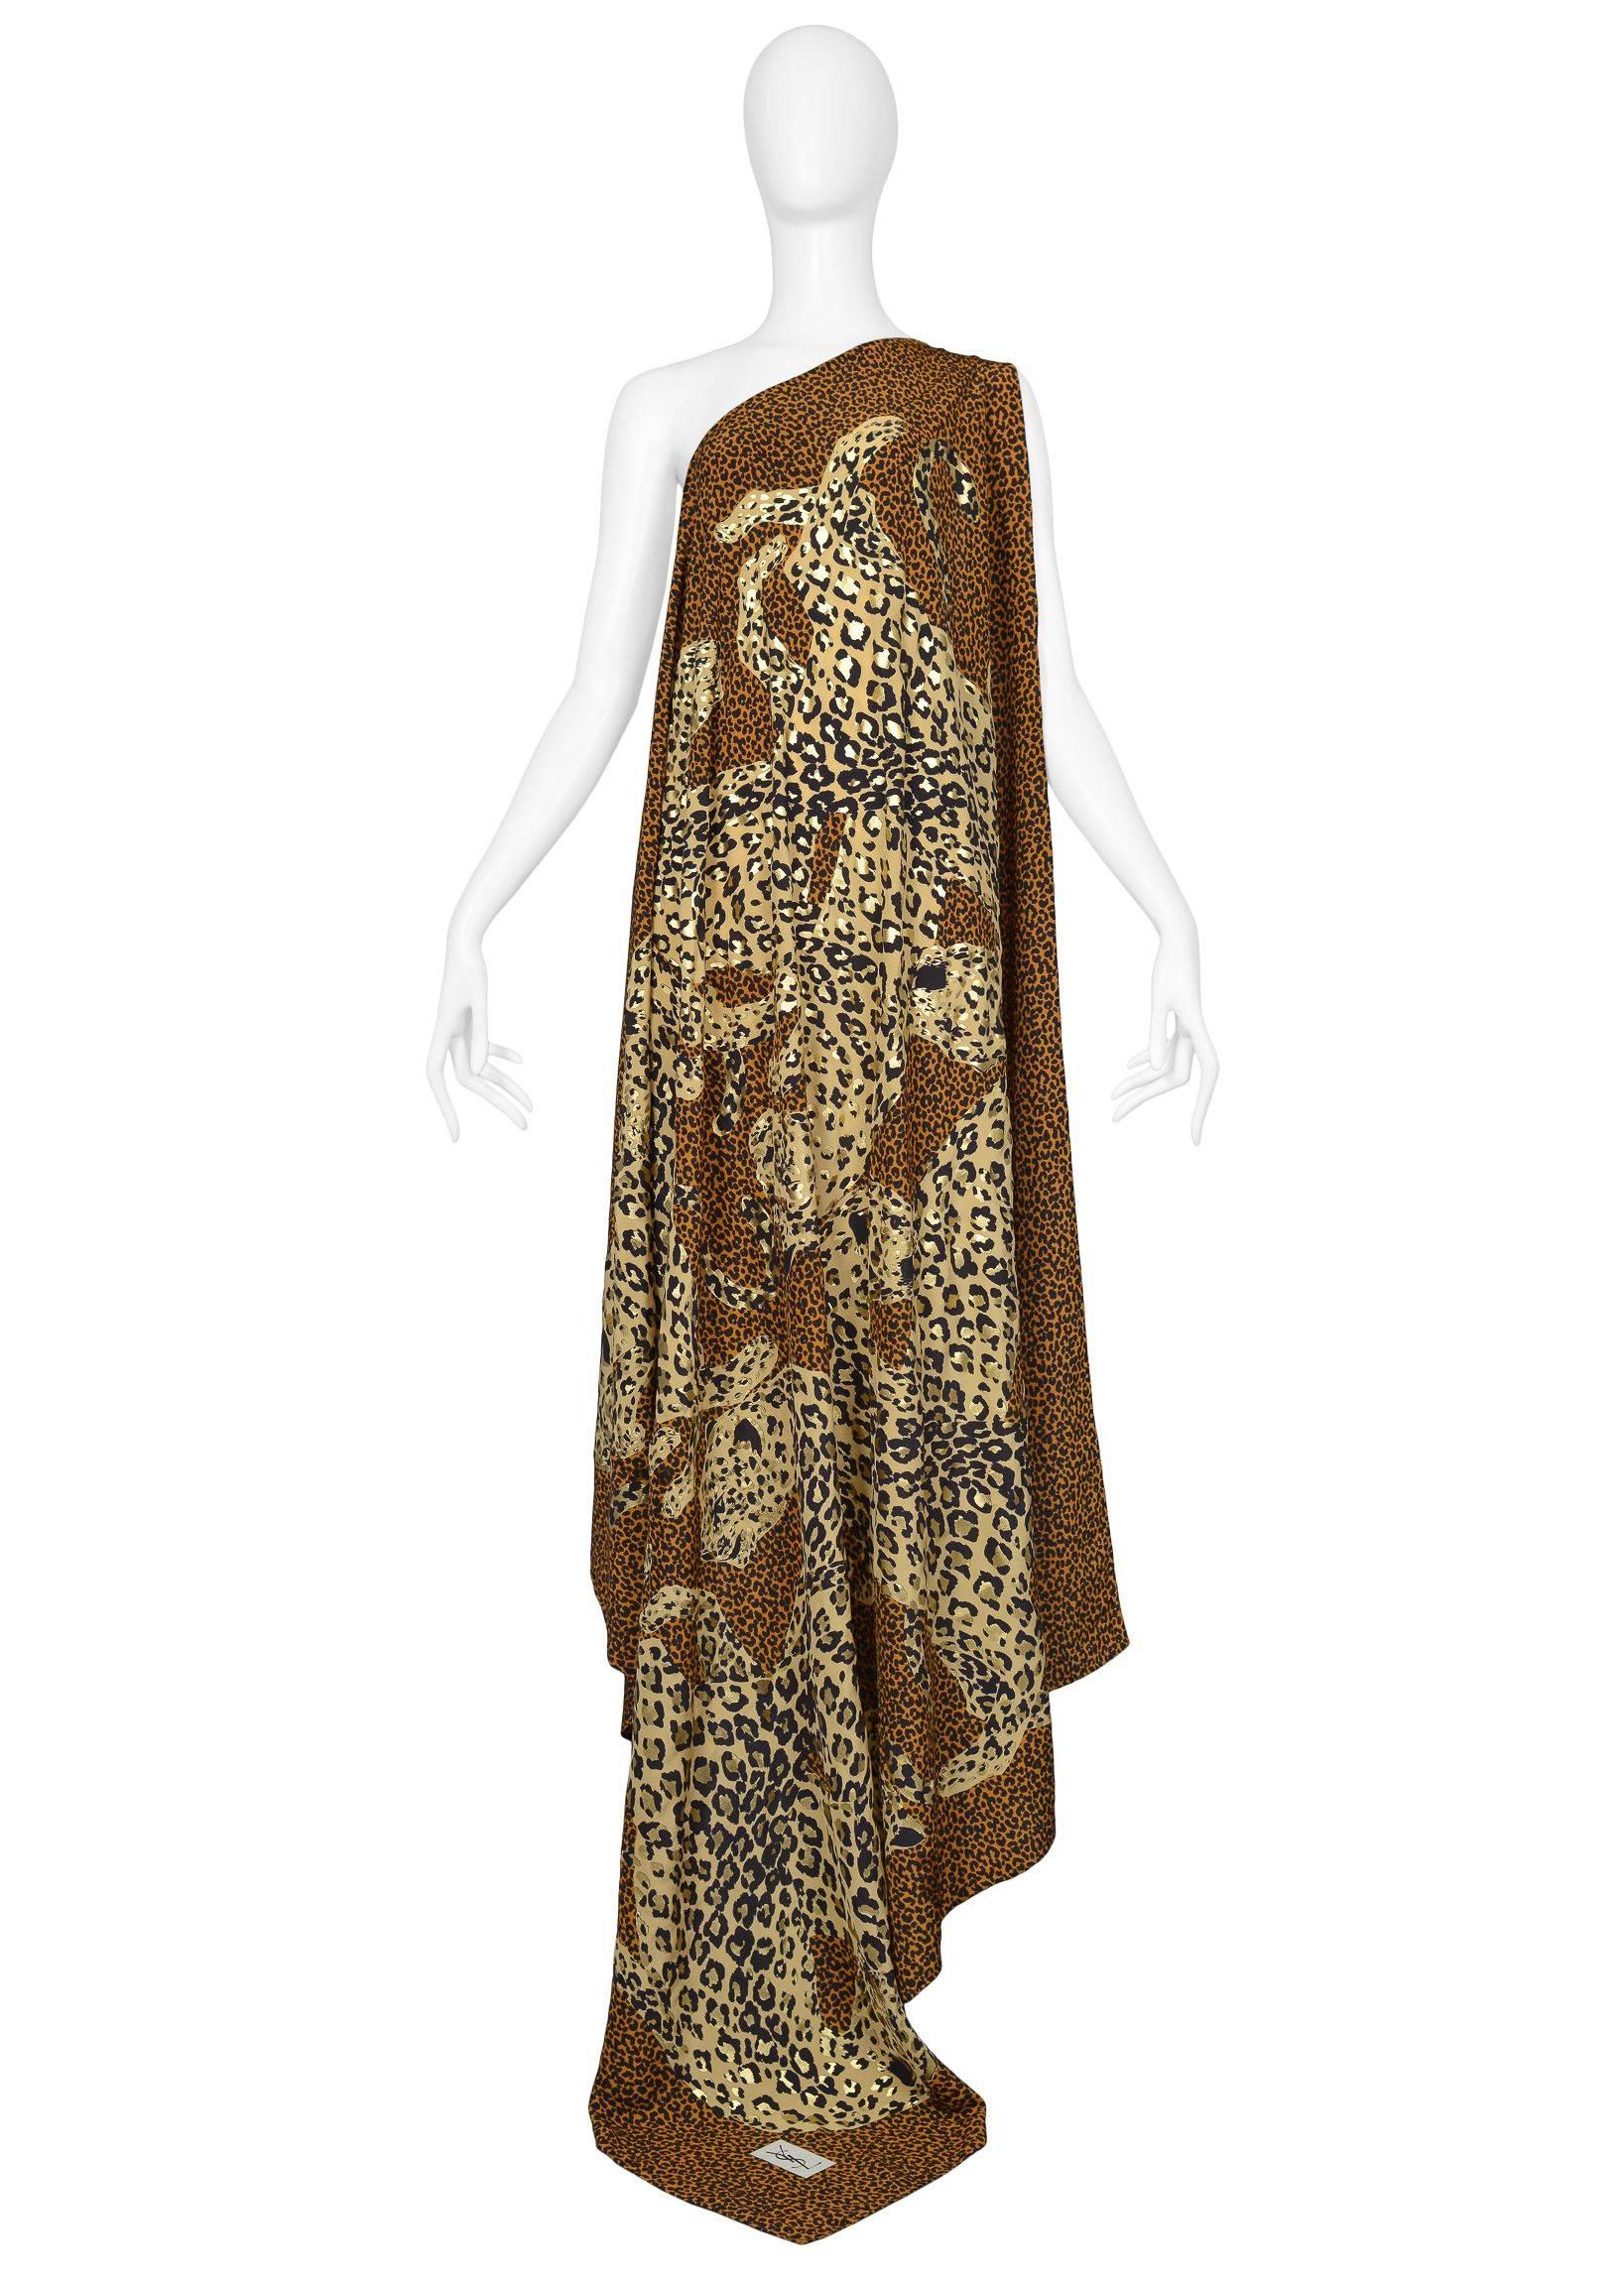 Vintage 1980's Yves Saint Laurent giant silk leopard and metallic gold print scarf. Can be used as a scarf, wrap or sarong. YSL logo at corner. 